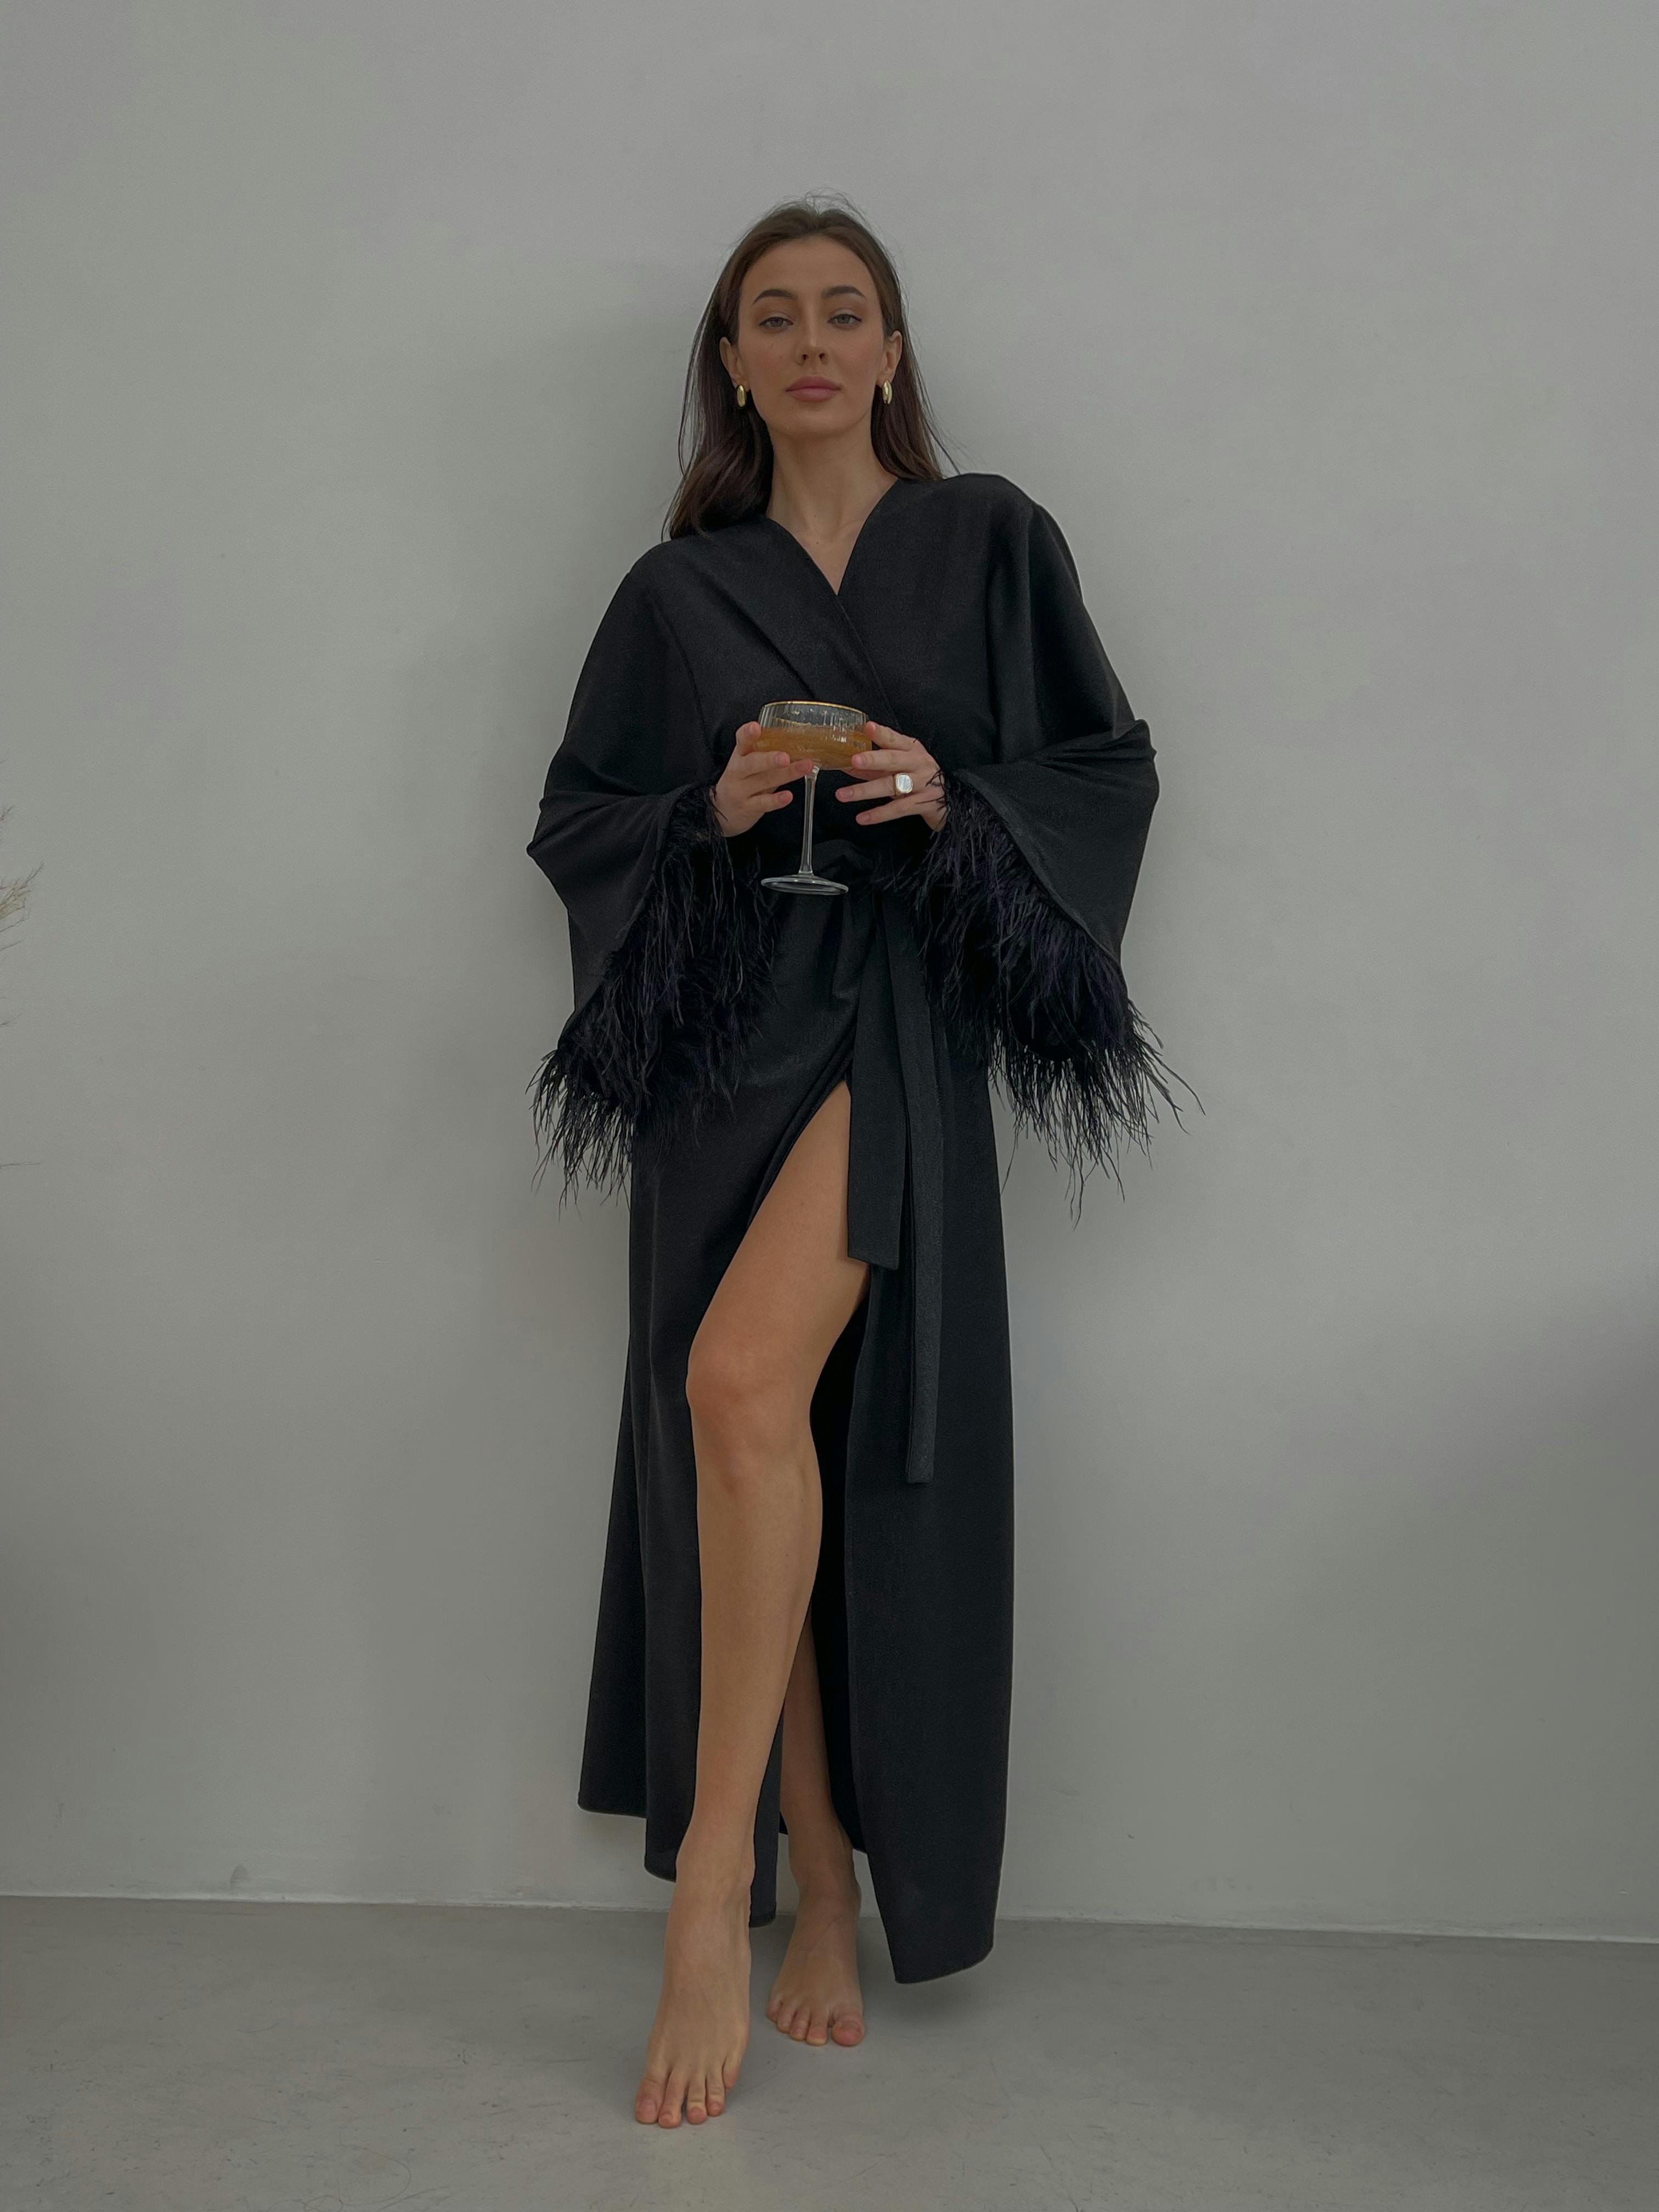 Additional image of Shiny Long Black Robe With Feathers Sleeves, a product by Okiya Studio